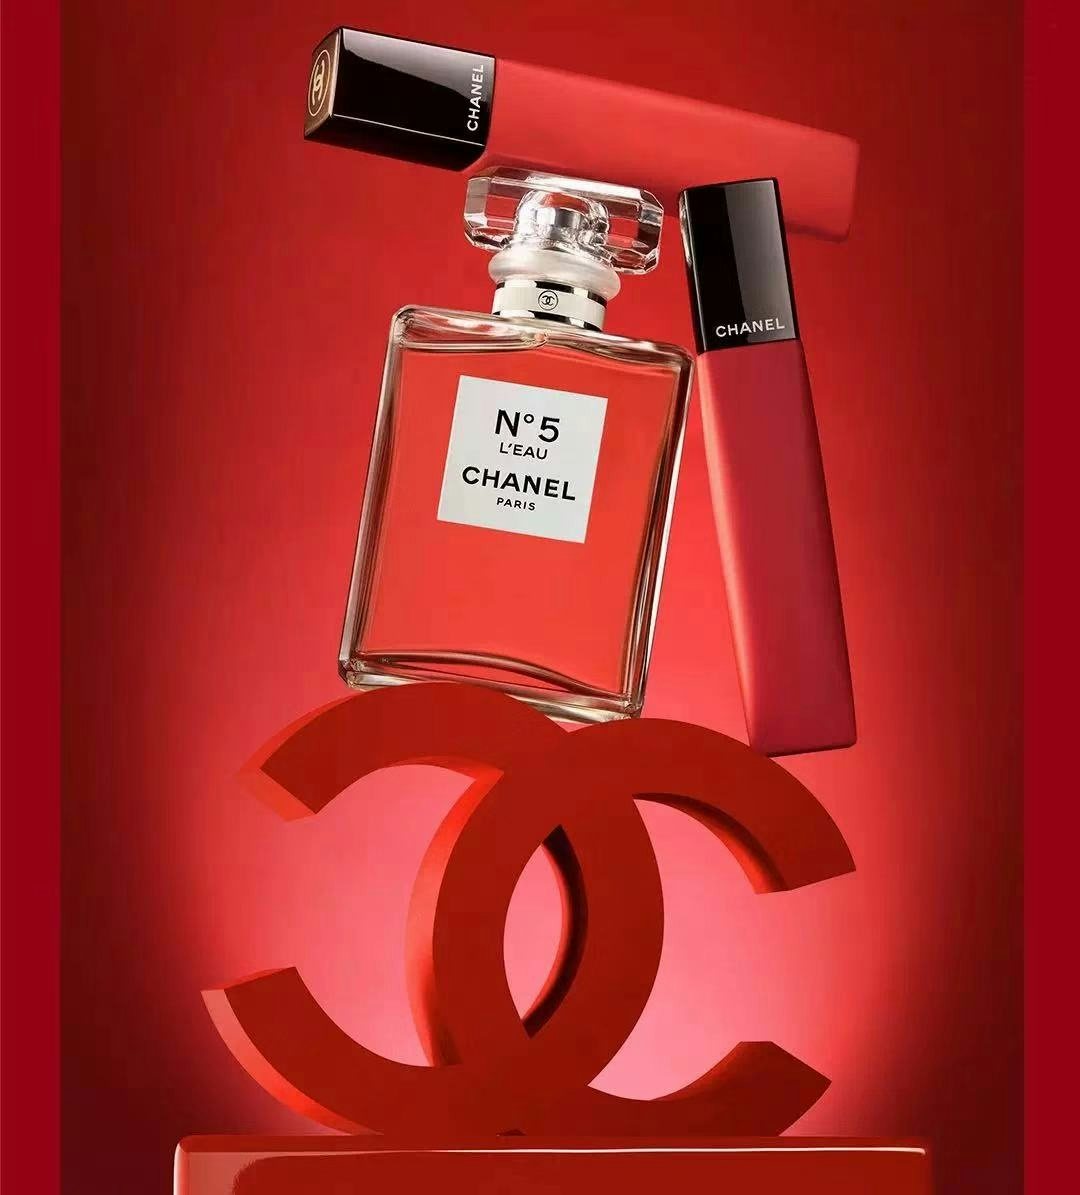 Chanel released a Singles' Day marketing campaign on WeChat. Courtesy photo